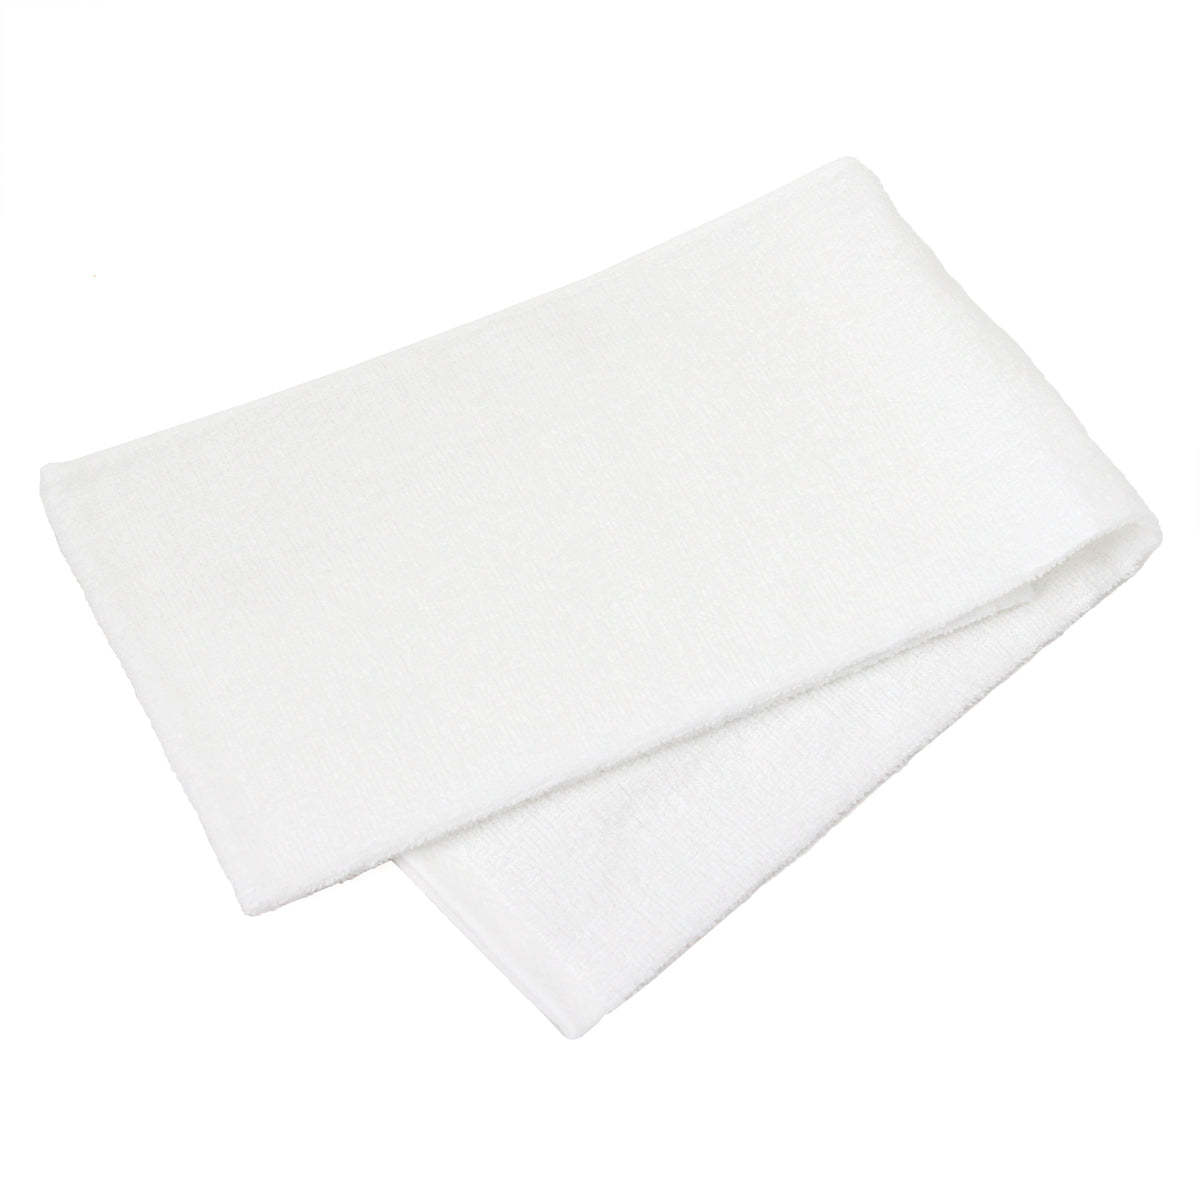 Hiorie Men's Water-Absorption Roll Head Face Towel 1 Sheets Cotton 100% Japan